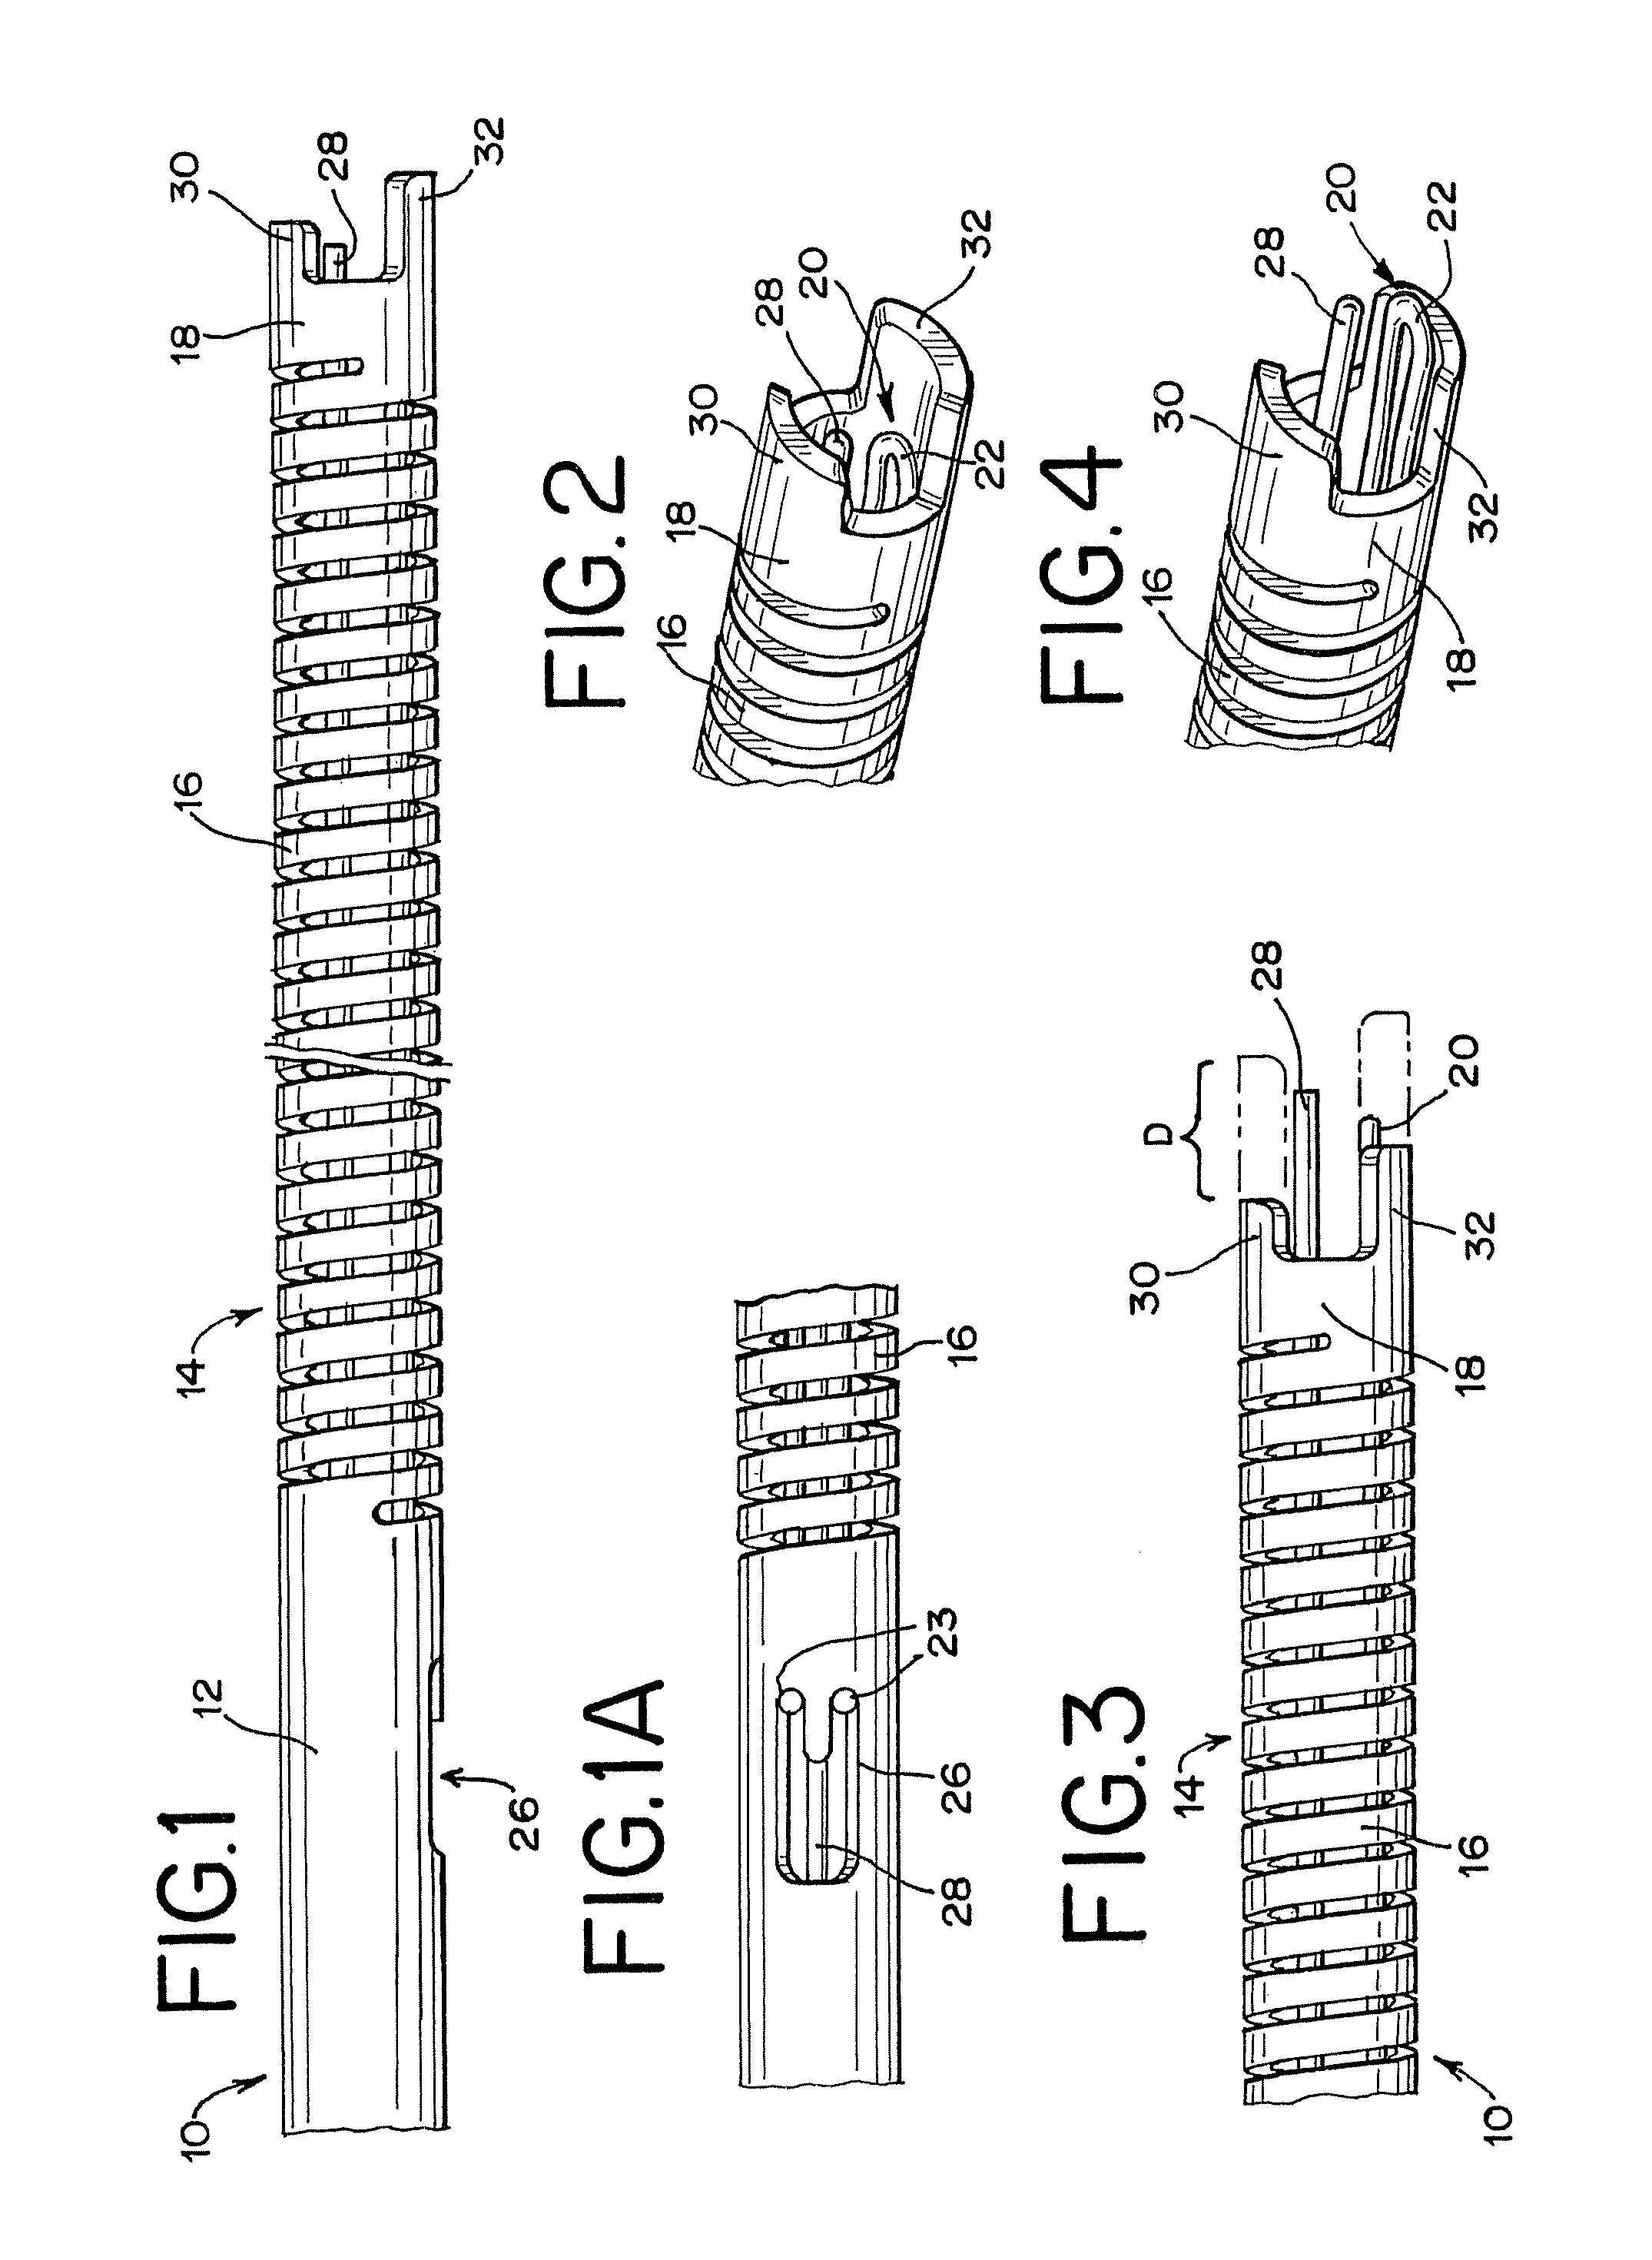 Implantable medical device detachment system and methods of using the same